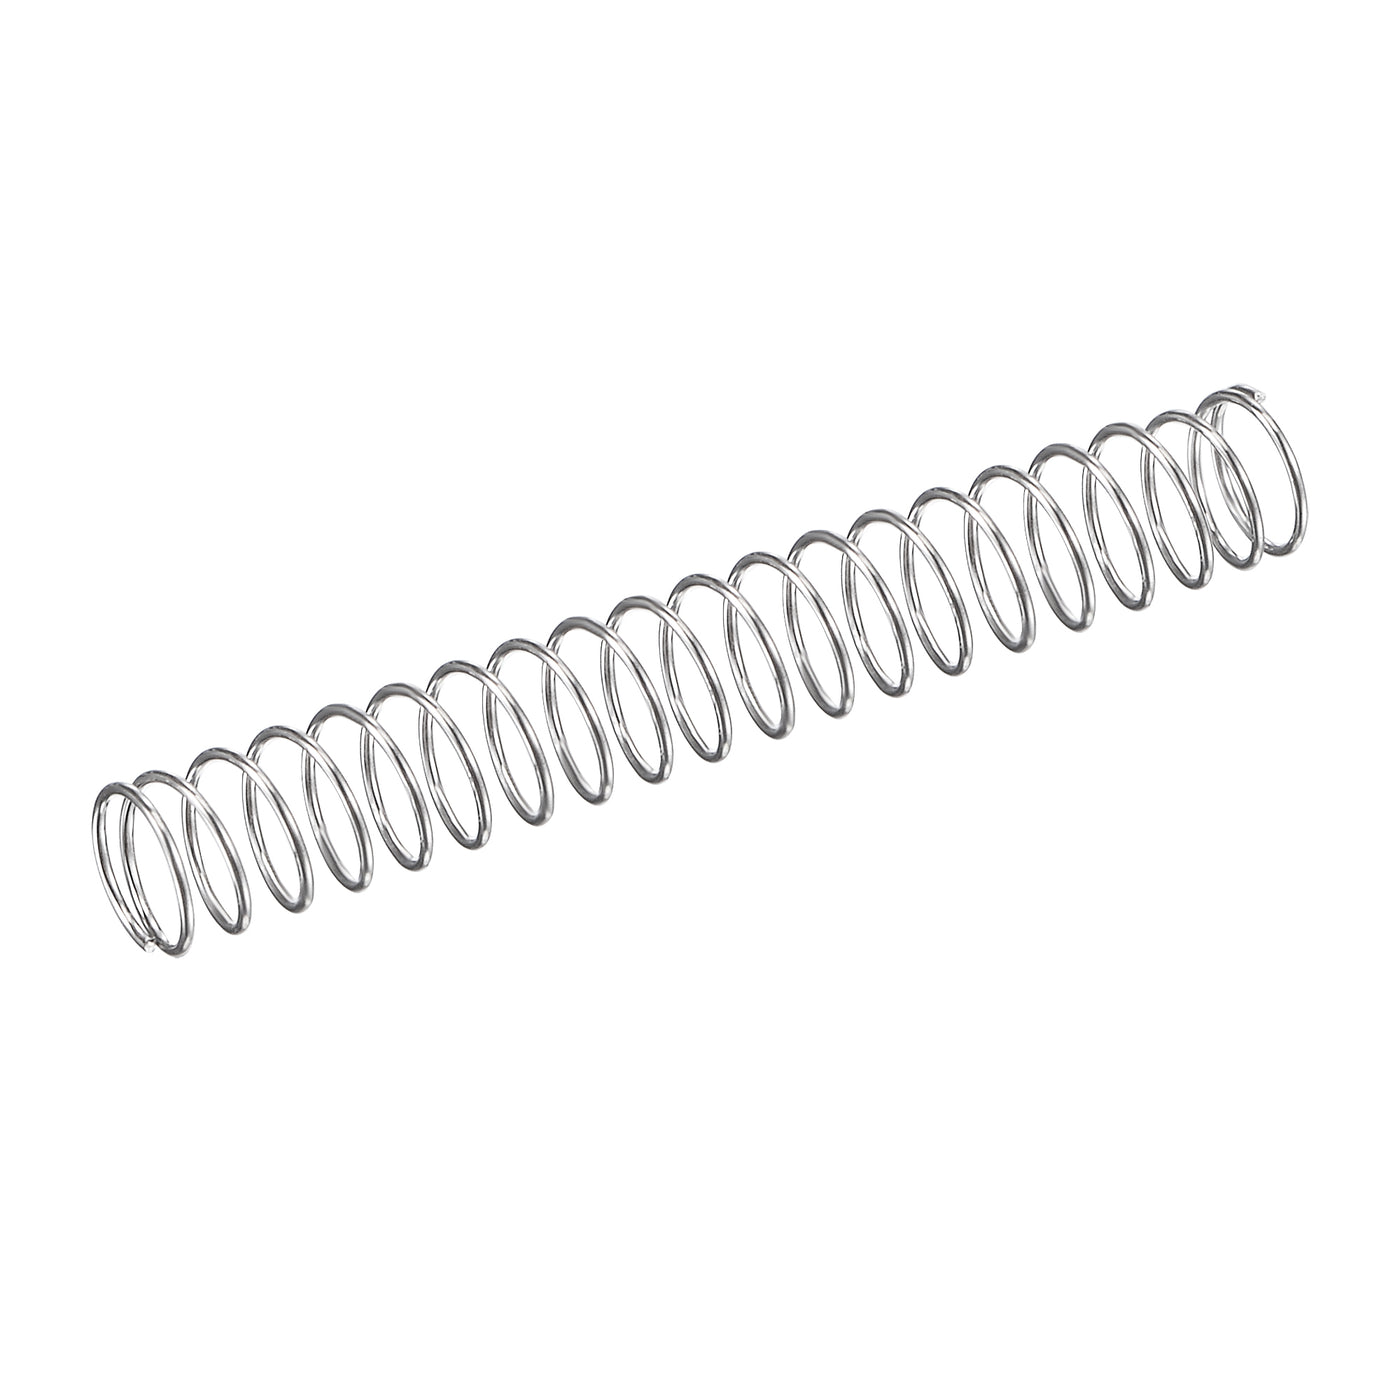 uxcell Uxcell 5mmx0.4mmx35mm 304 Stainless Steel Compression Spring 2N Load Capacity 15pcs